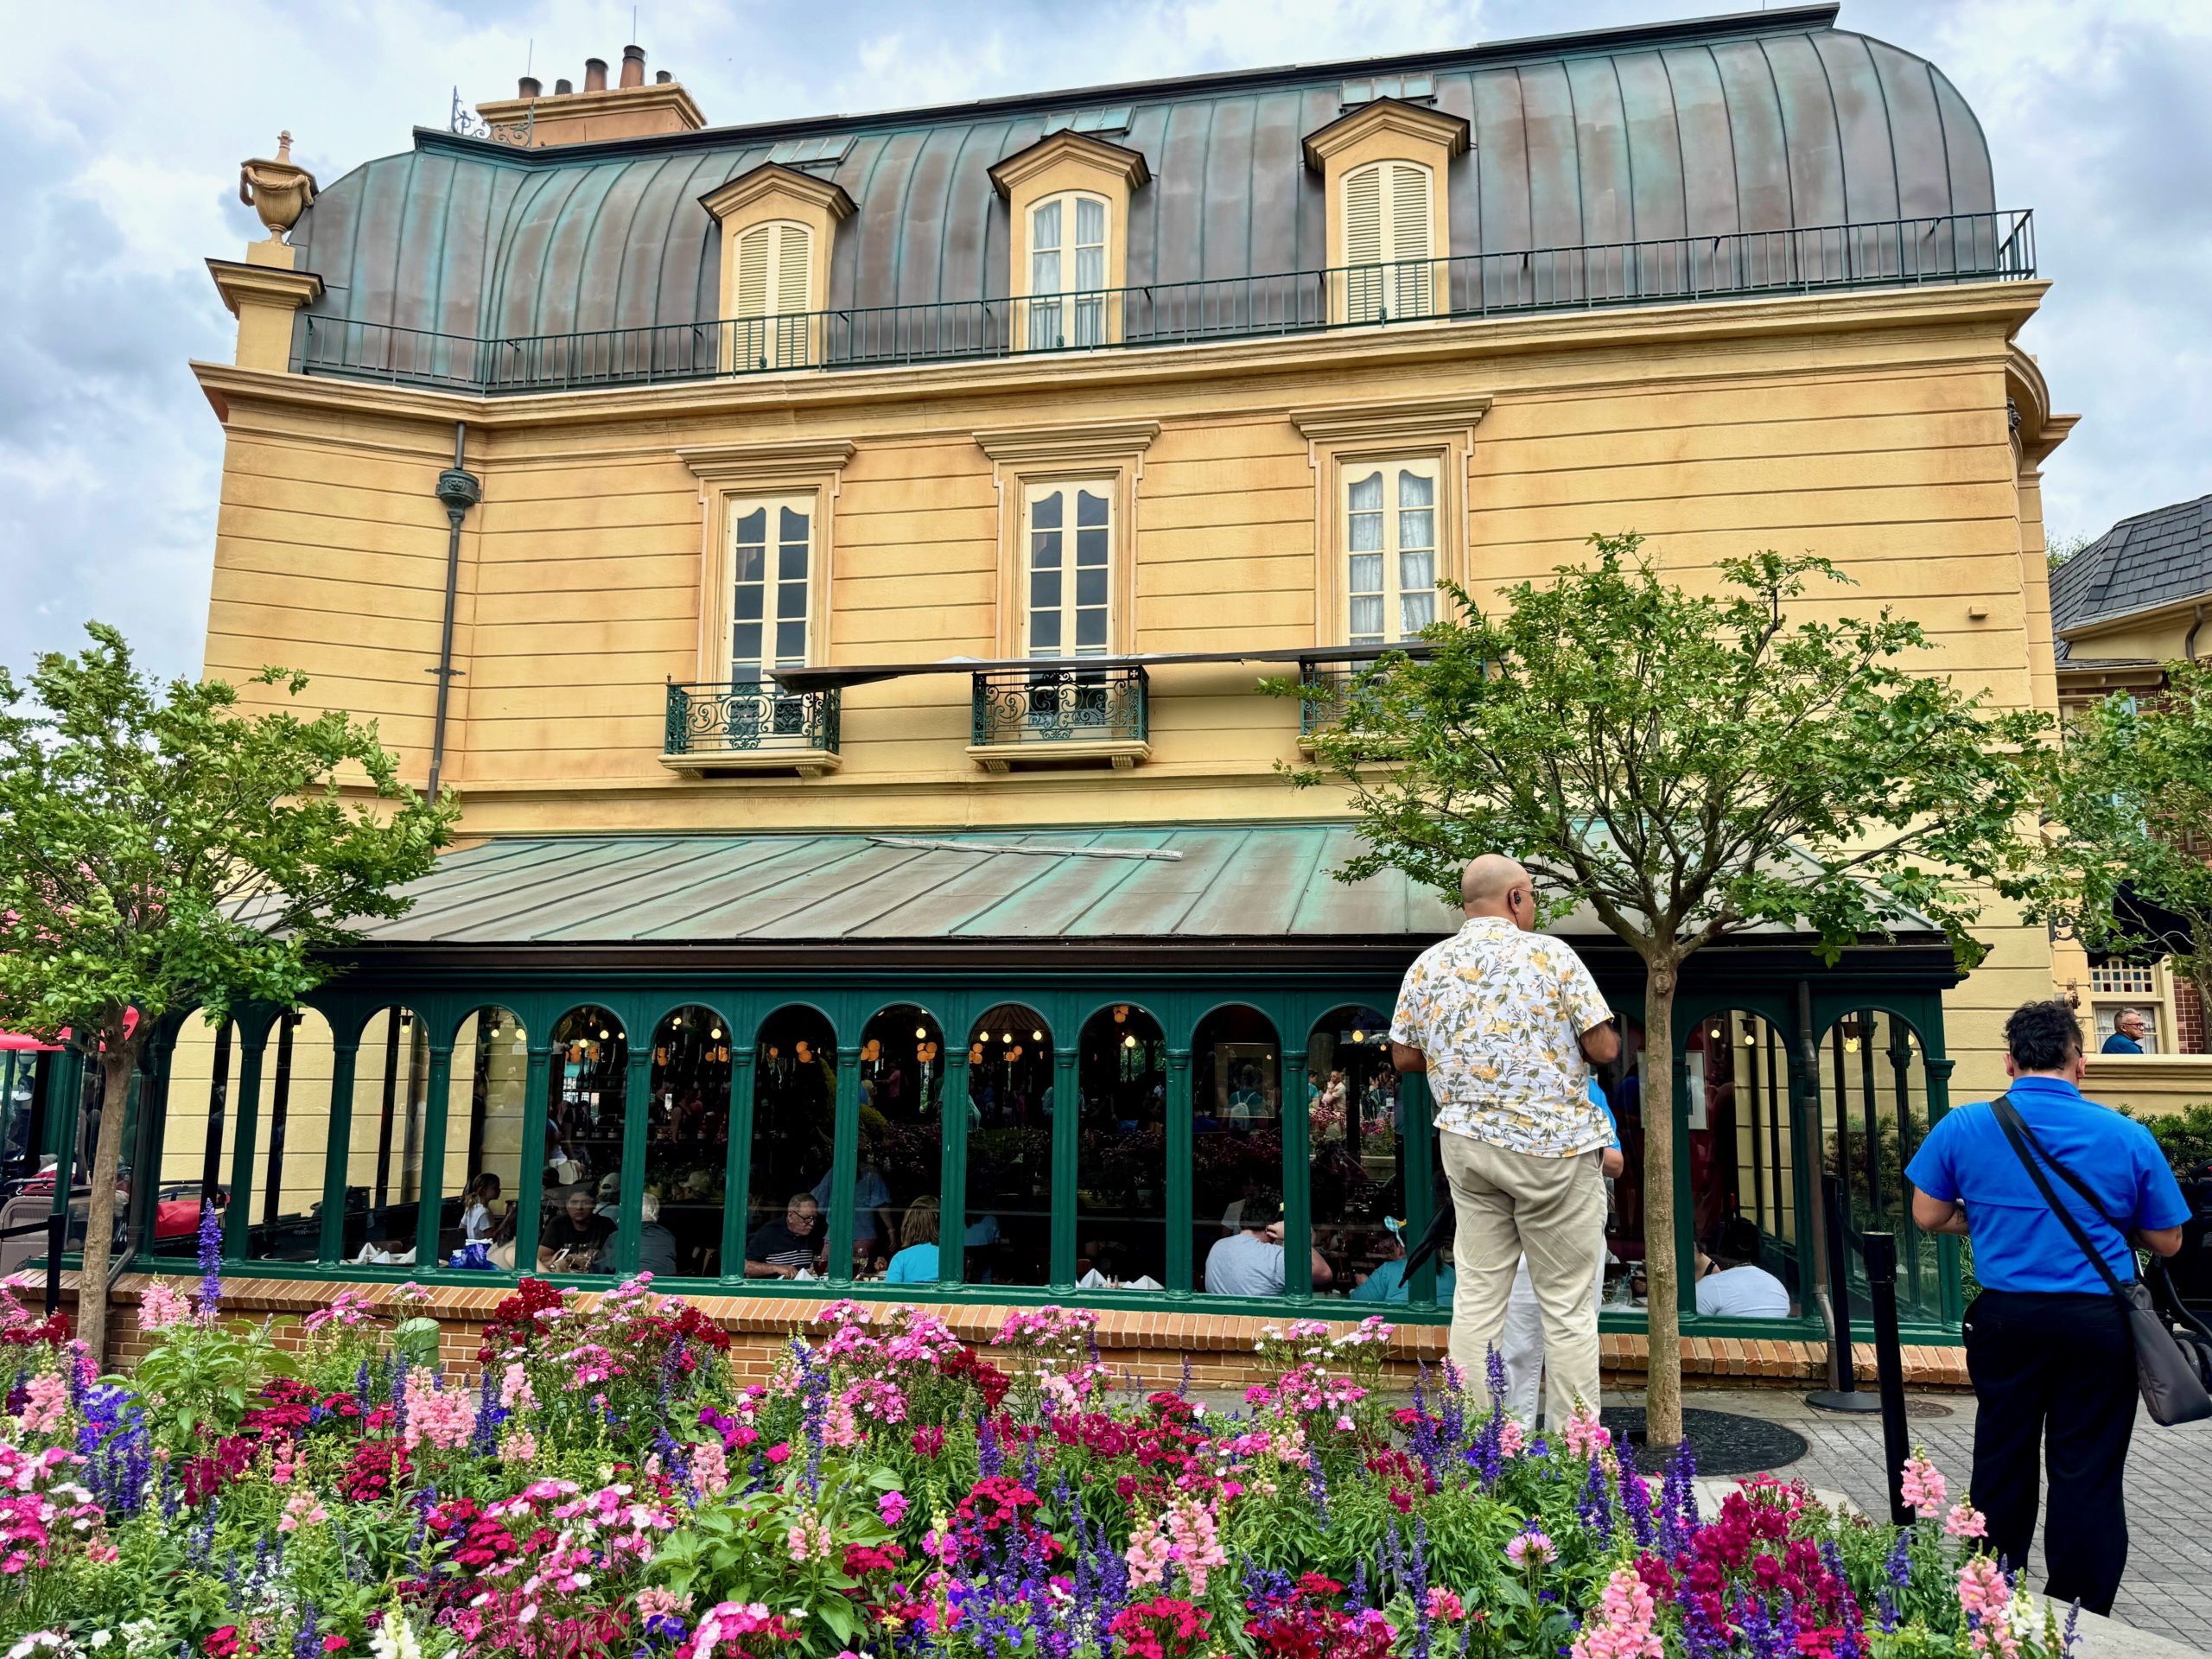 France Pavilion Sustains Damage Amid High Winds in EPCOT